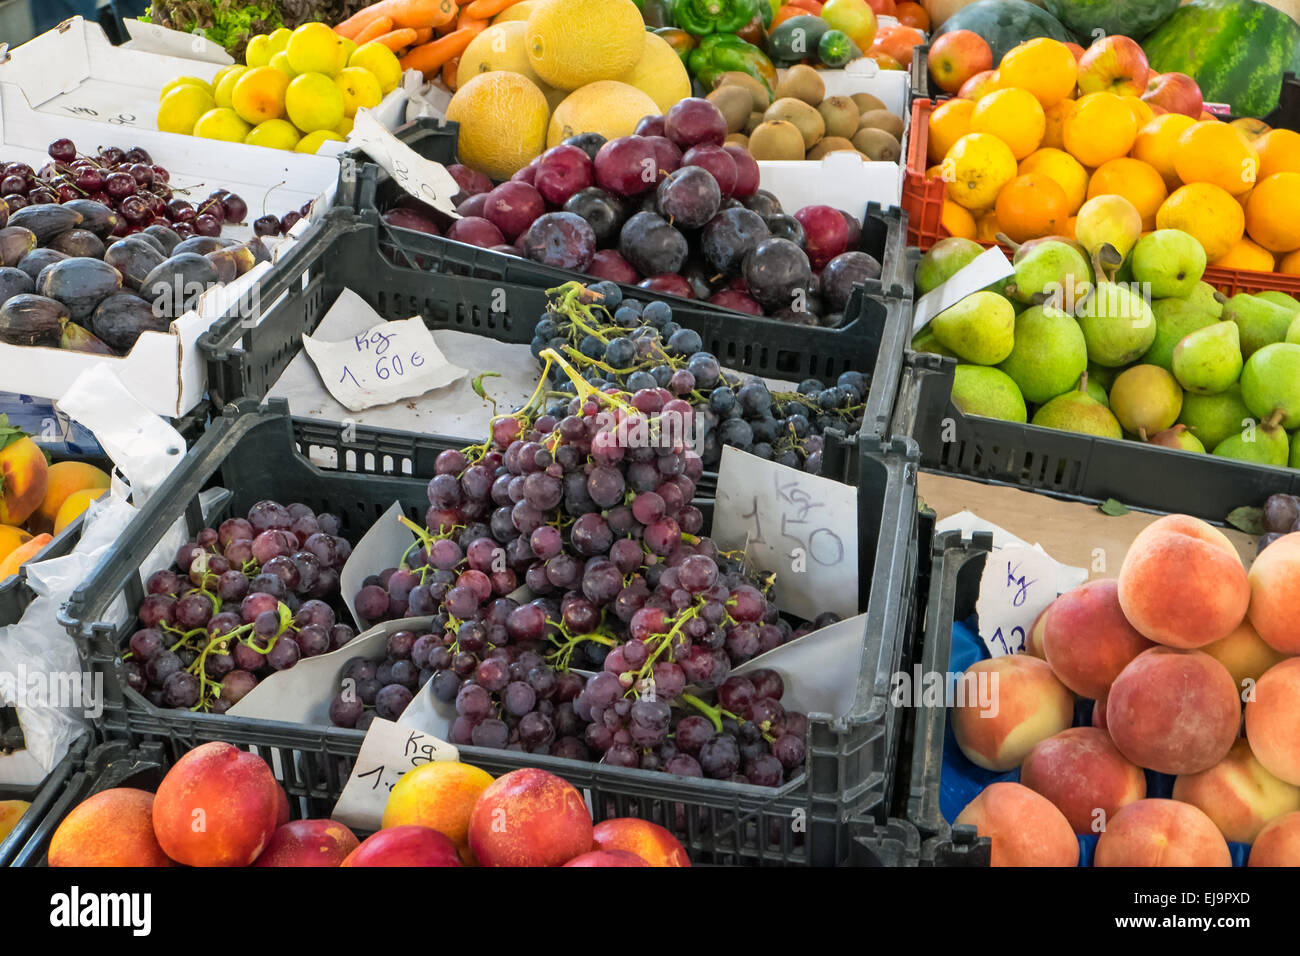 Many different fruits at a market Stock Photo